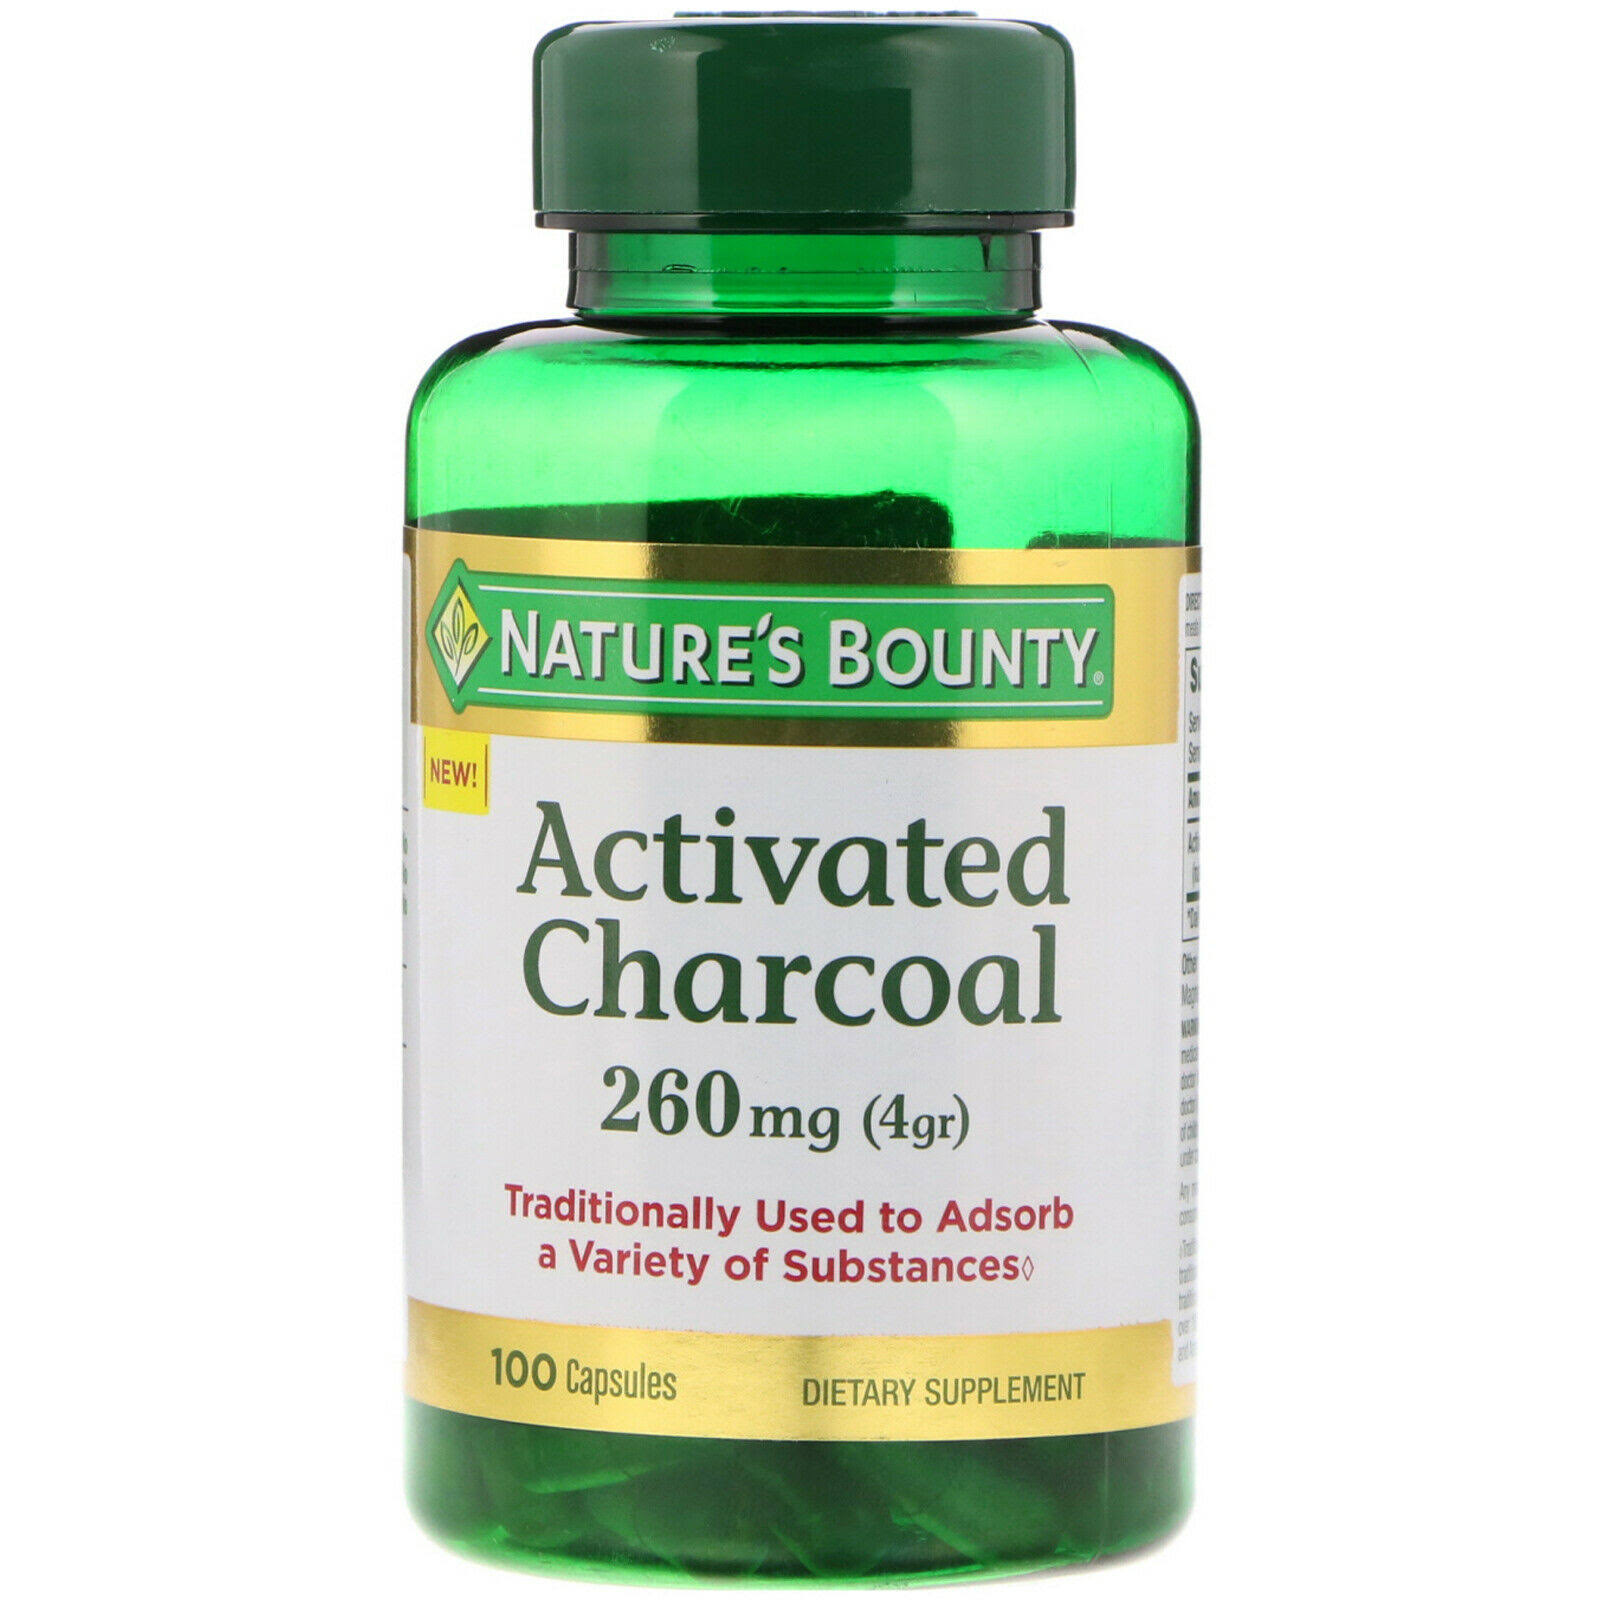 Nature's Bounty Activated Charcoal Supplement - 260mg, 100ct